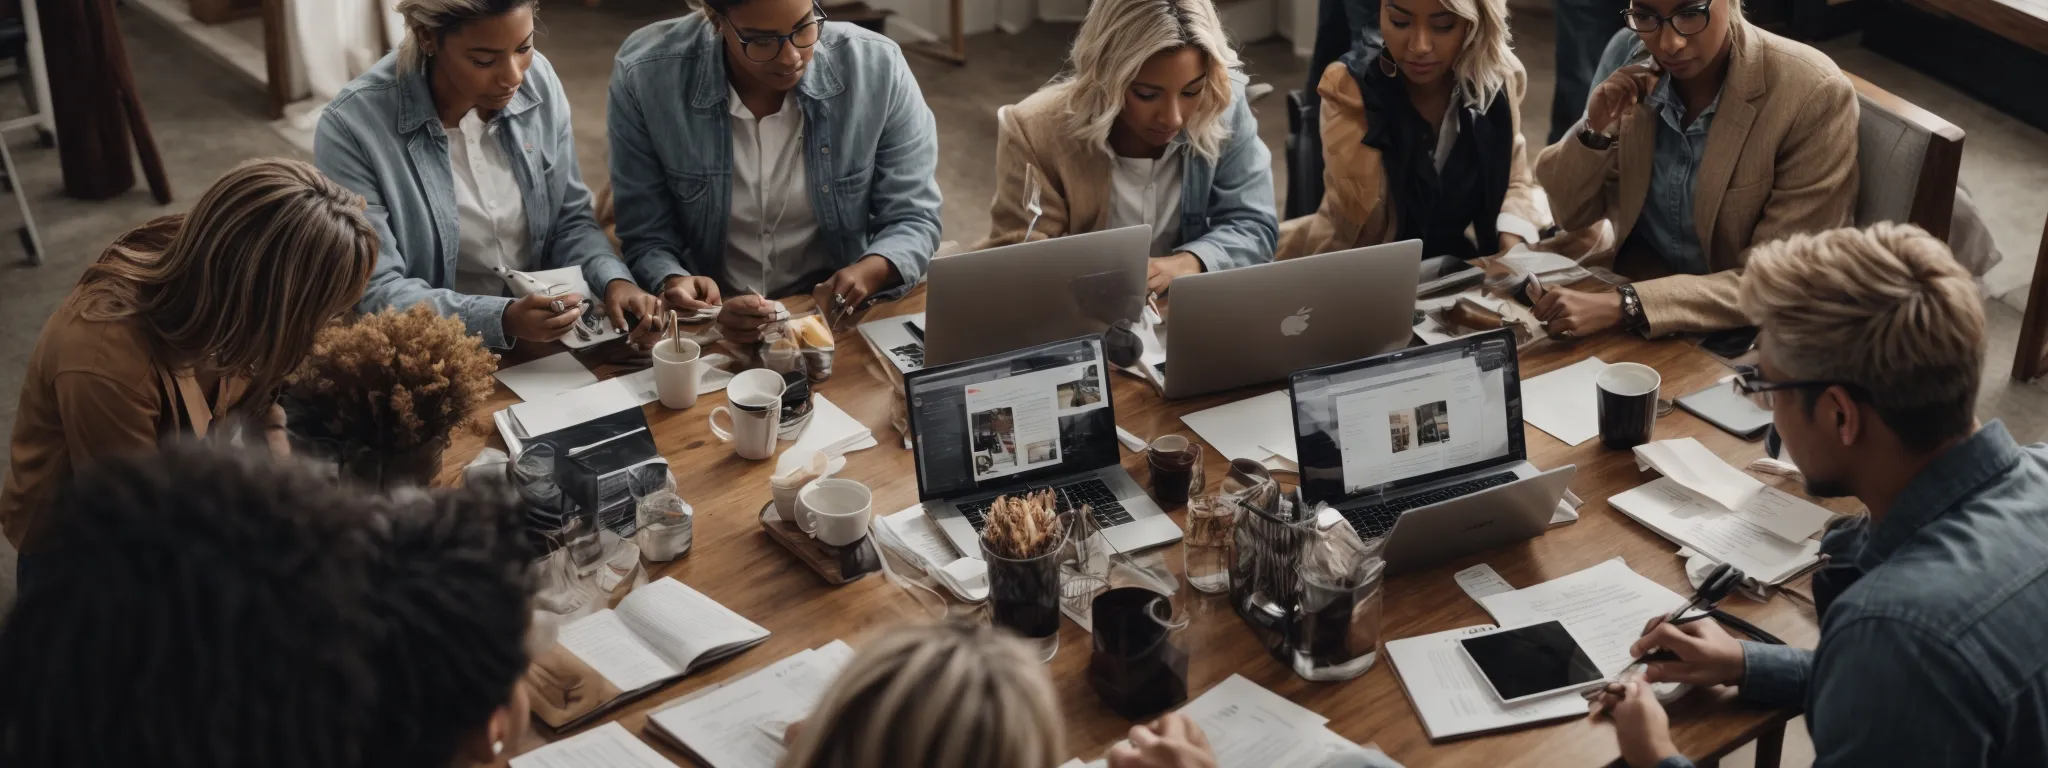 a creative brainstorming session with a diverse group of marketers strategizing around a table strewn with open laptops and marketing materials.